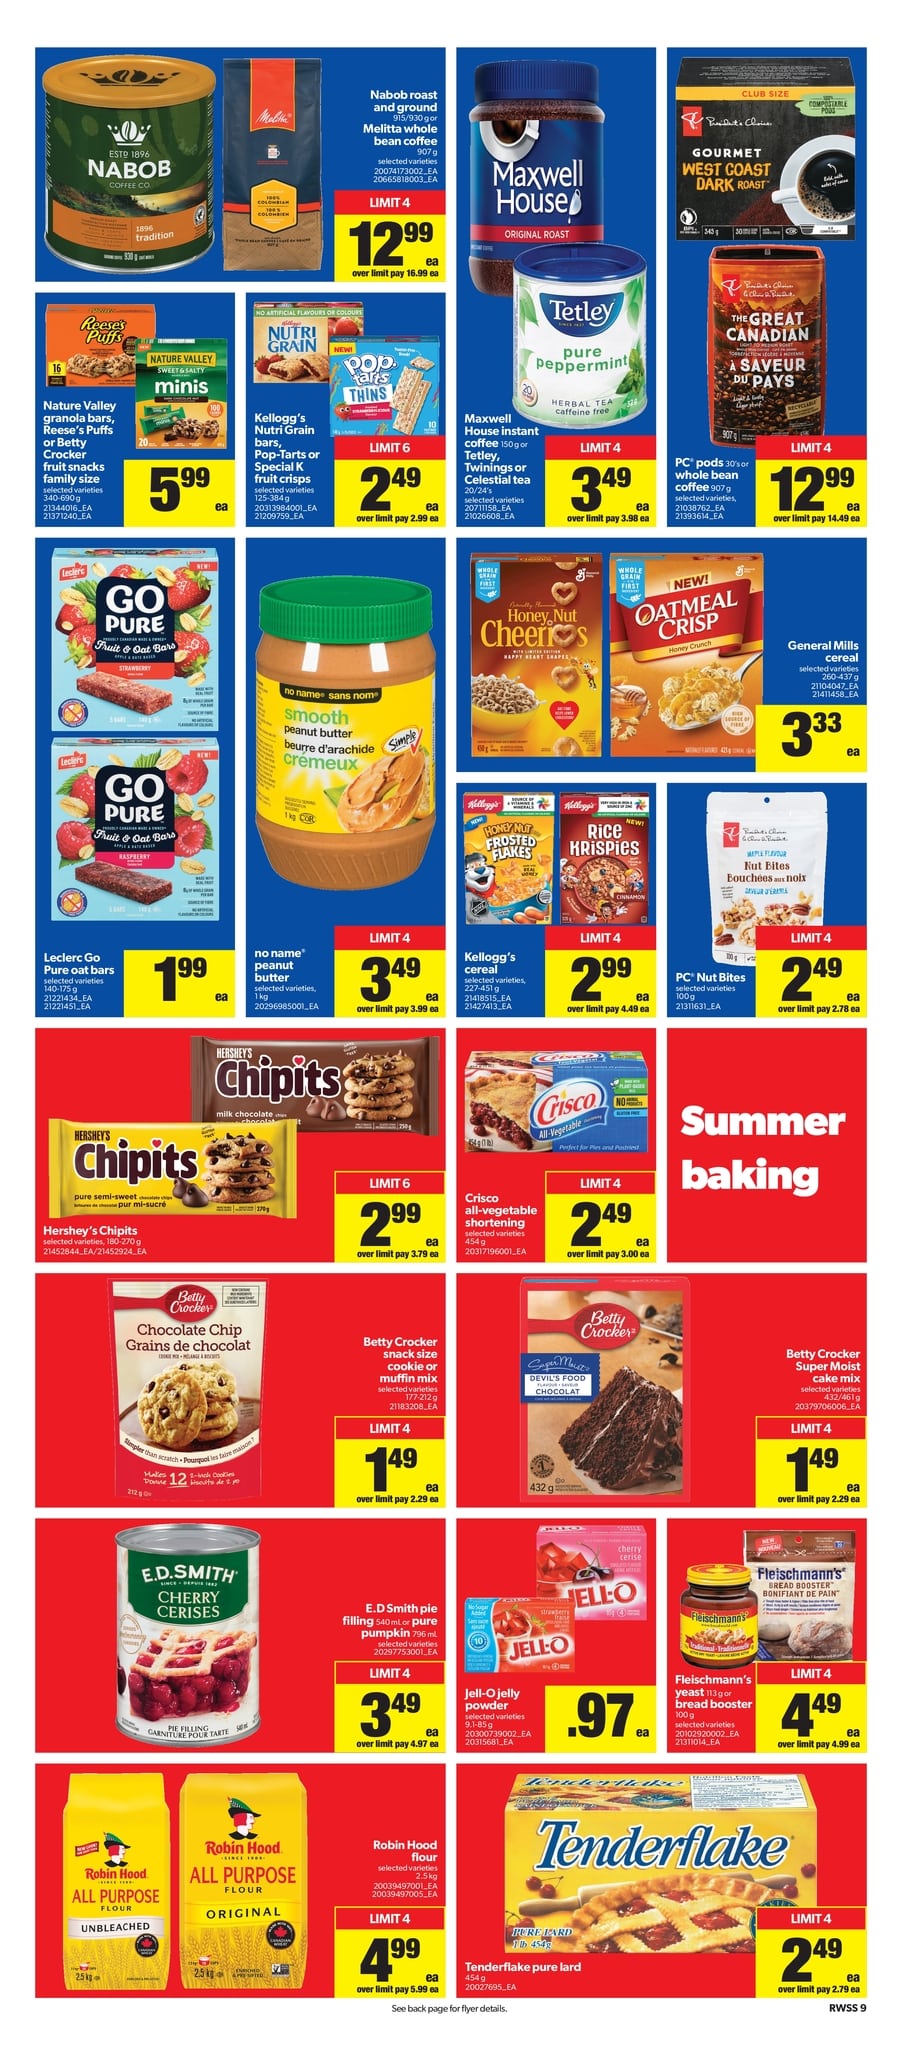 Real Canadian Superstore Western Canada - Weekly Flyer Specials - Page 10